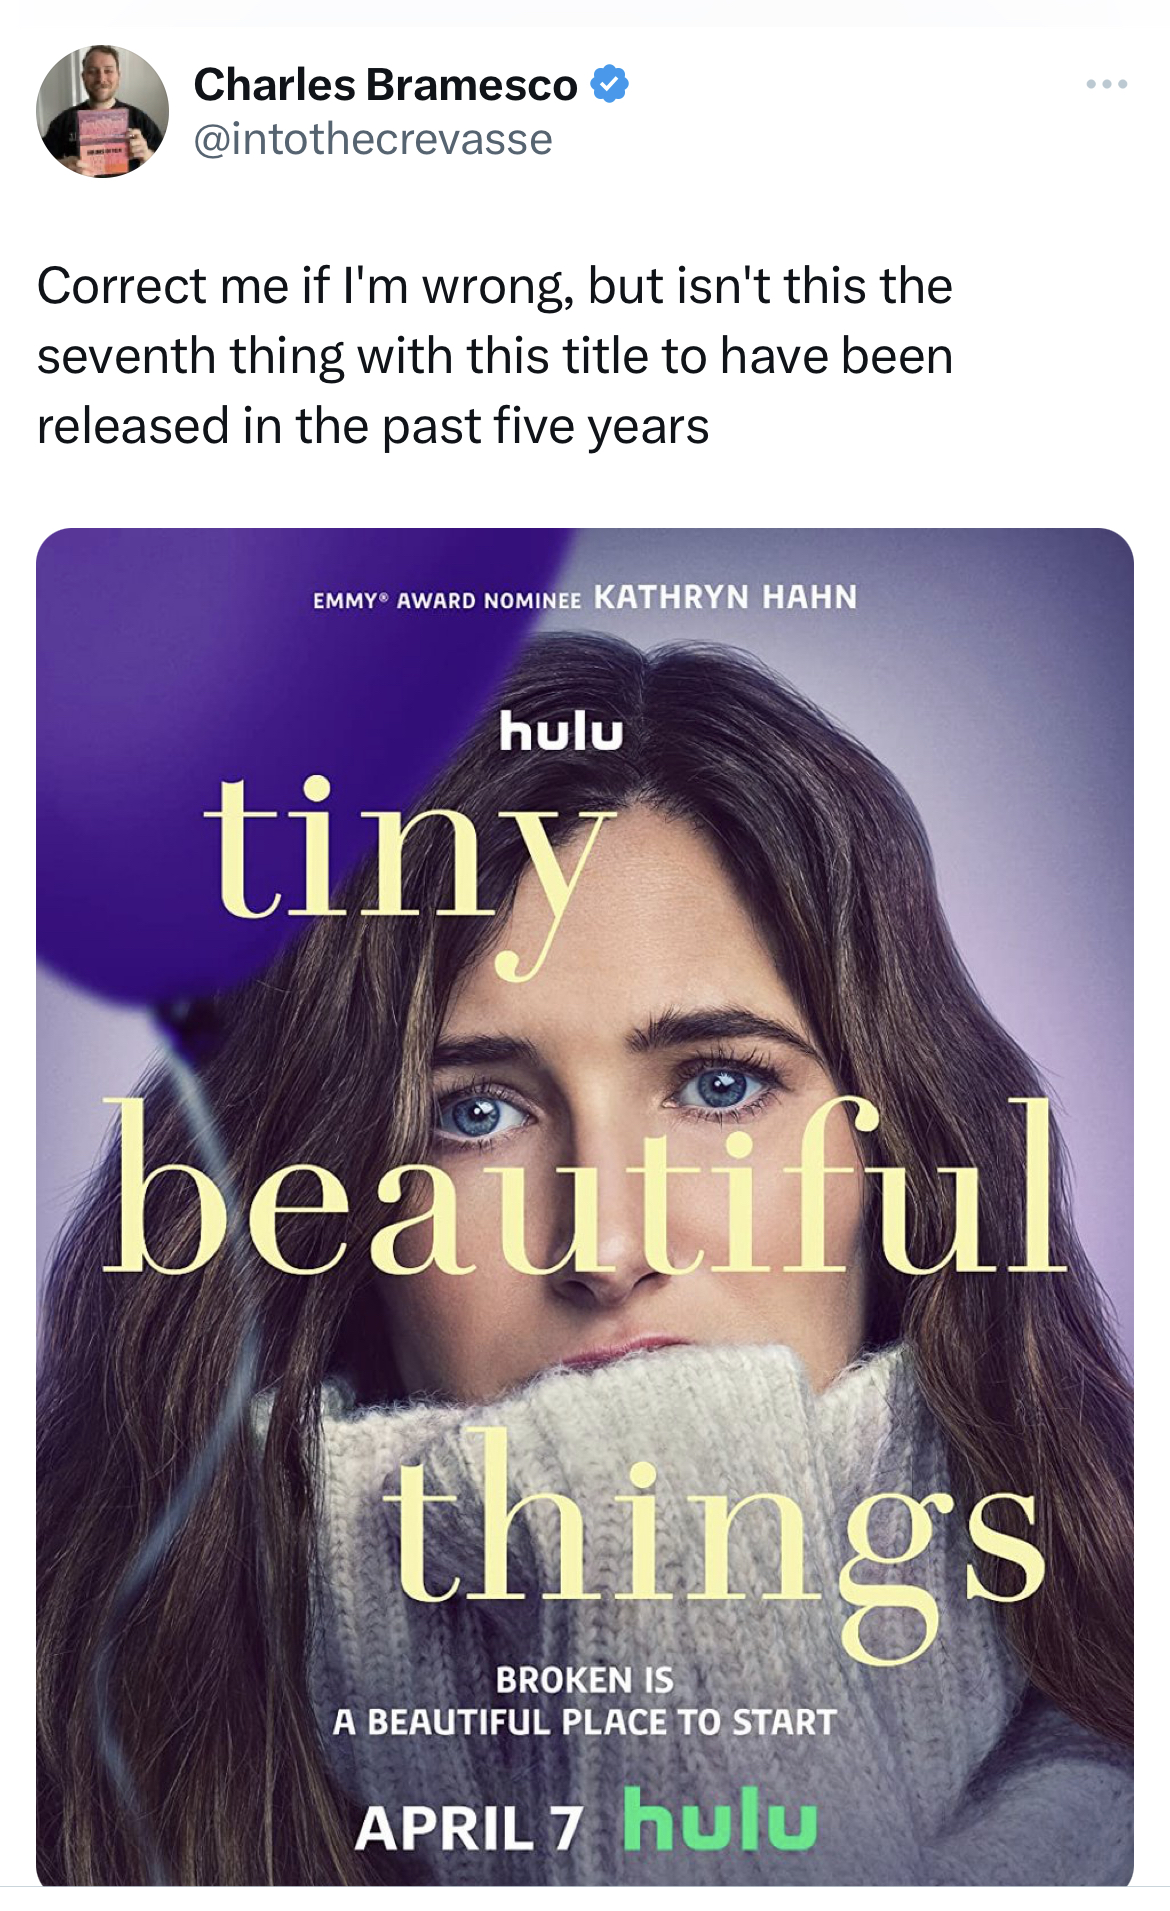 savage tweets tiny beautiful things tv show - Charles Bramesco Correct me if I'm wrong, but isn't this the seventh thing with this title to have been released in the past five years Emmy Award Nominee Kathryn Hahn hulu tiny beautiful things Broken Is A Be